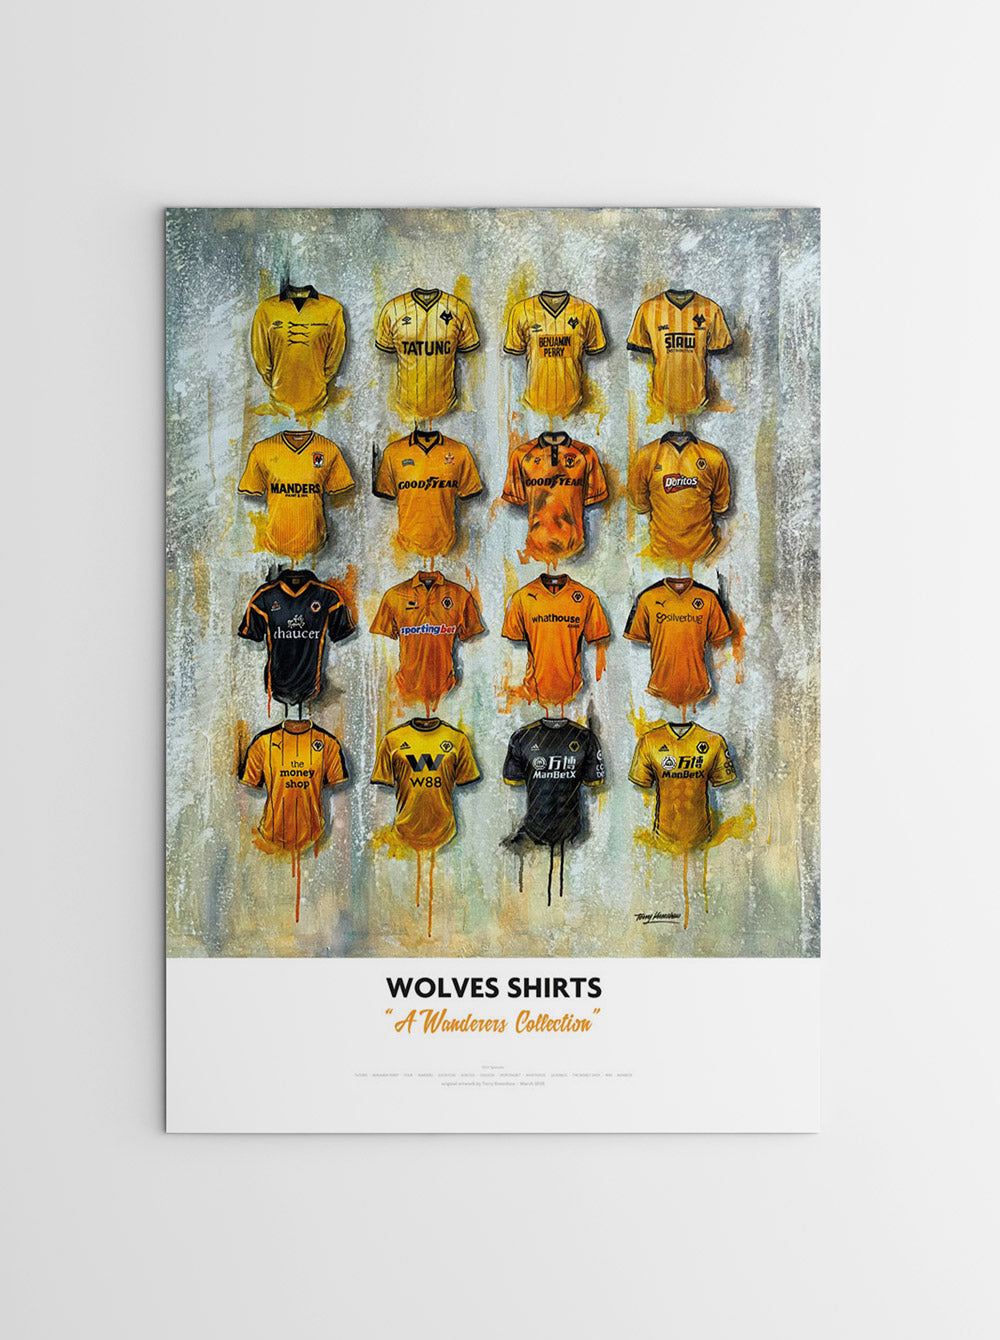 Wolves 16 Iconic Wolves jerseys through the club history - a Wanderers Collection.